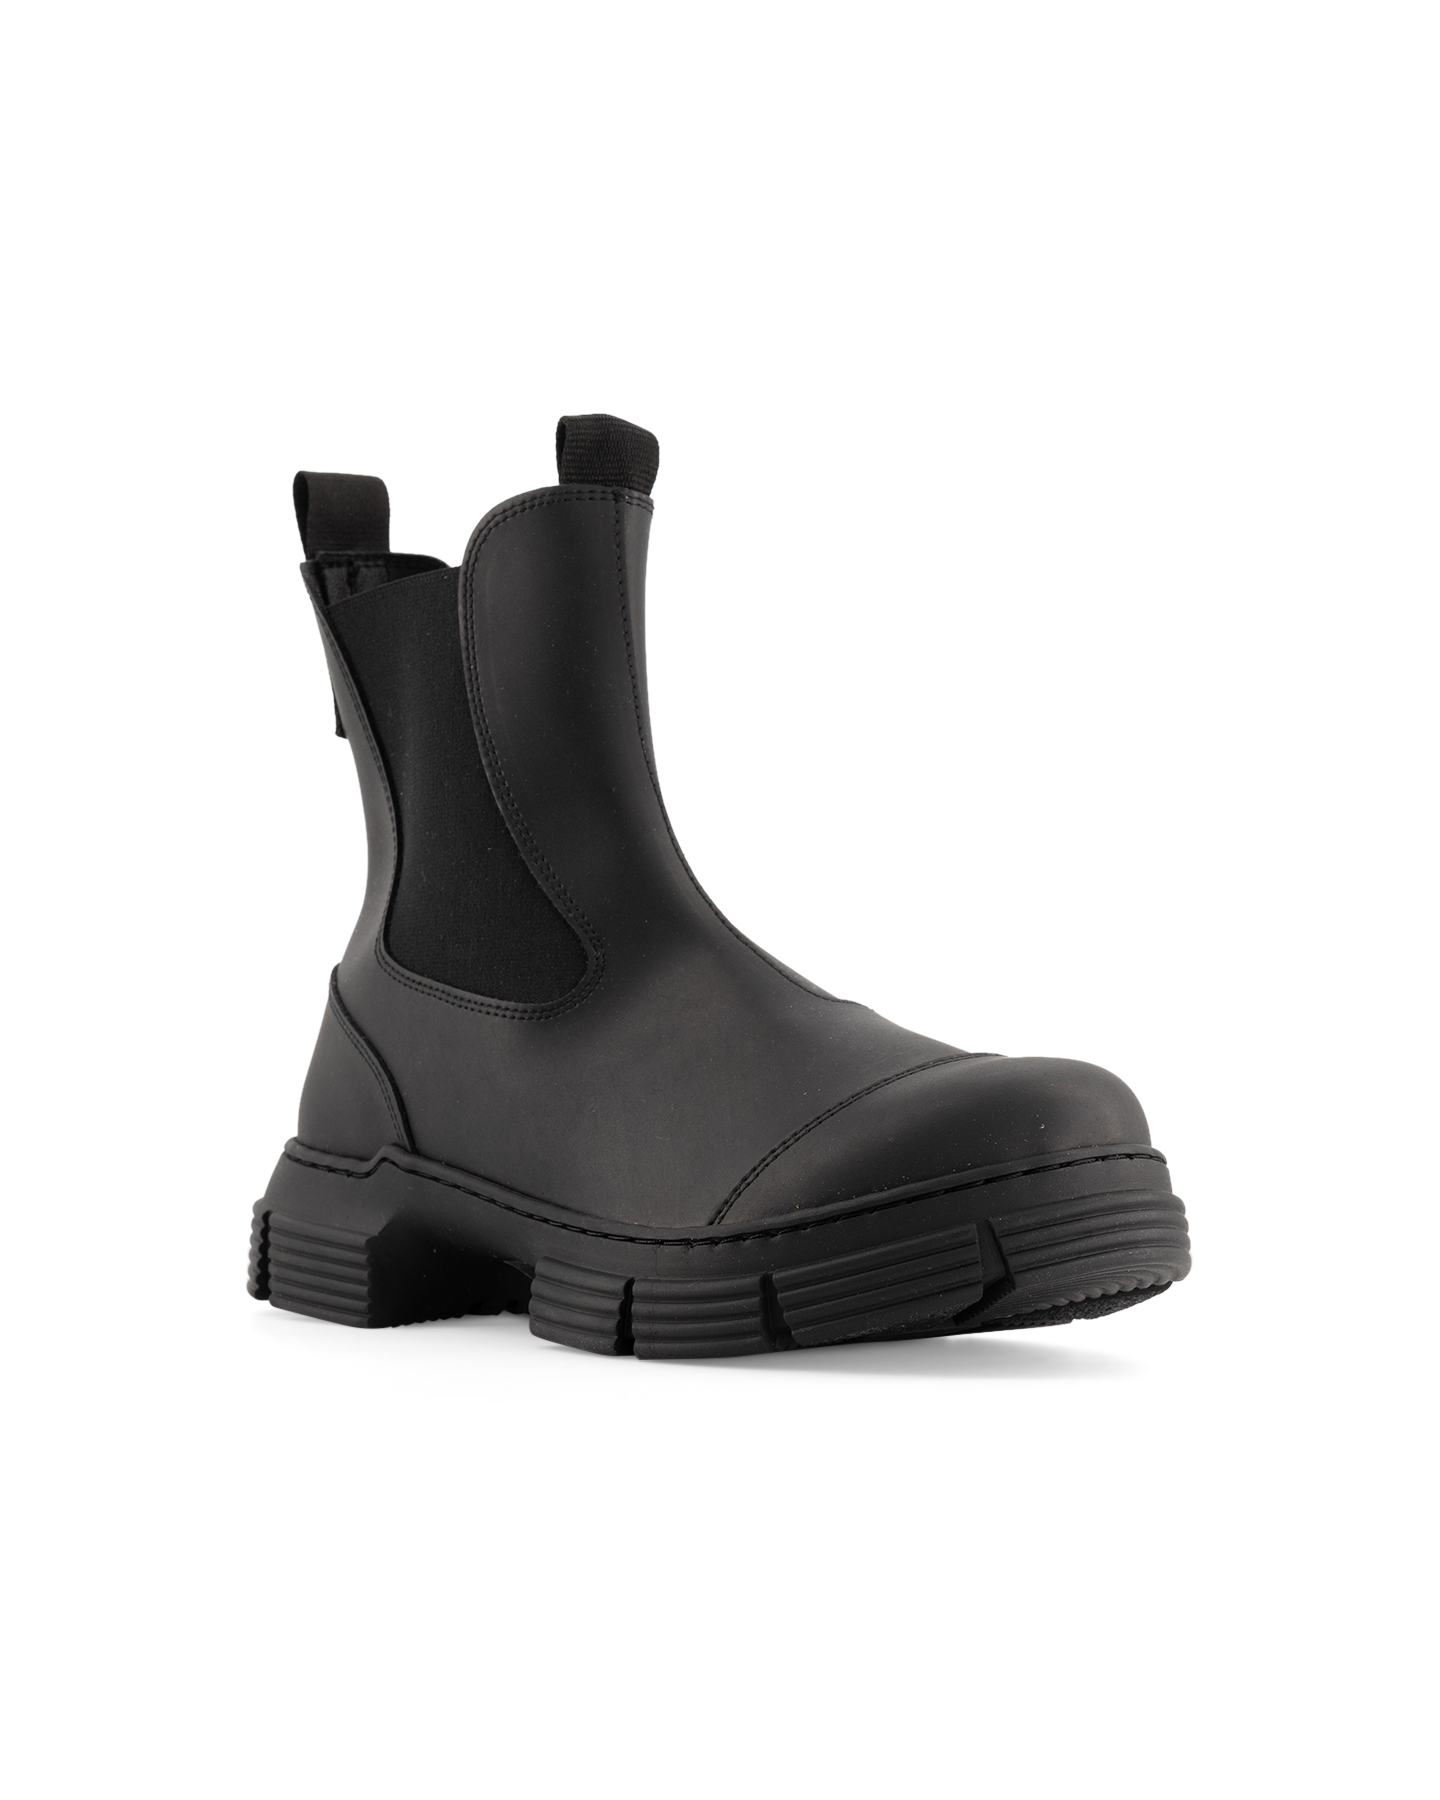 Ganni Recycled Rubber City Boot BLACK 2